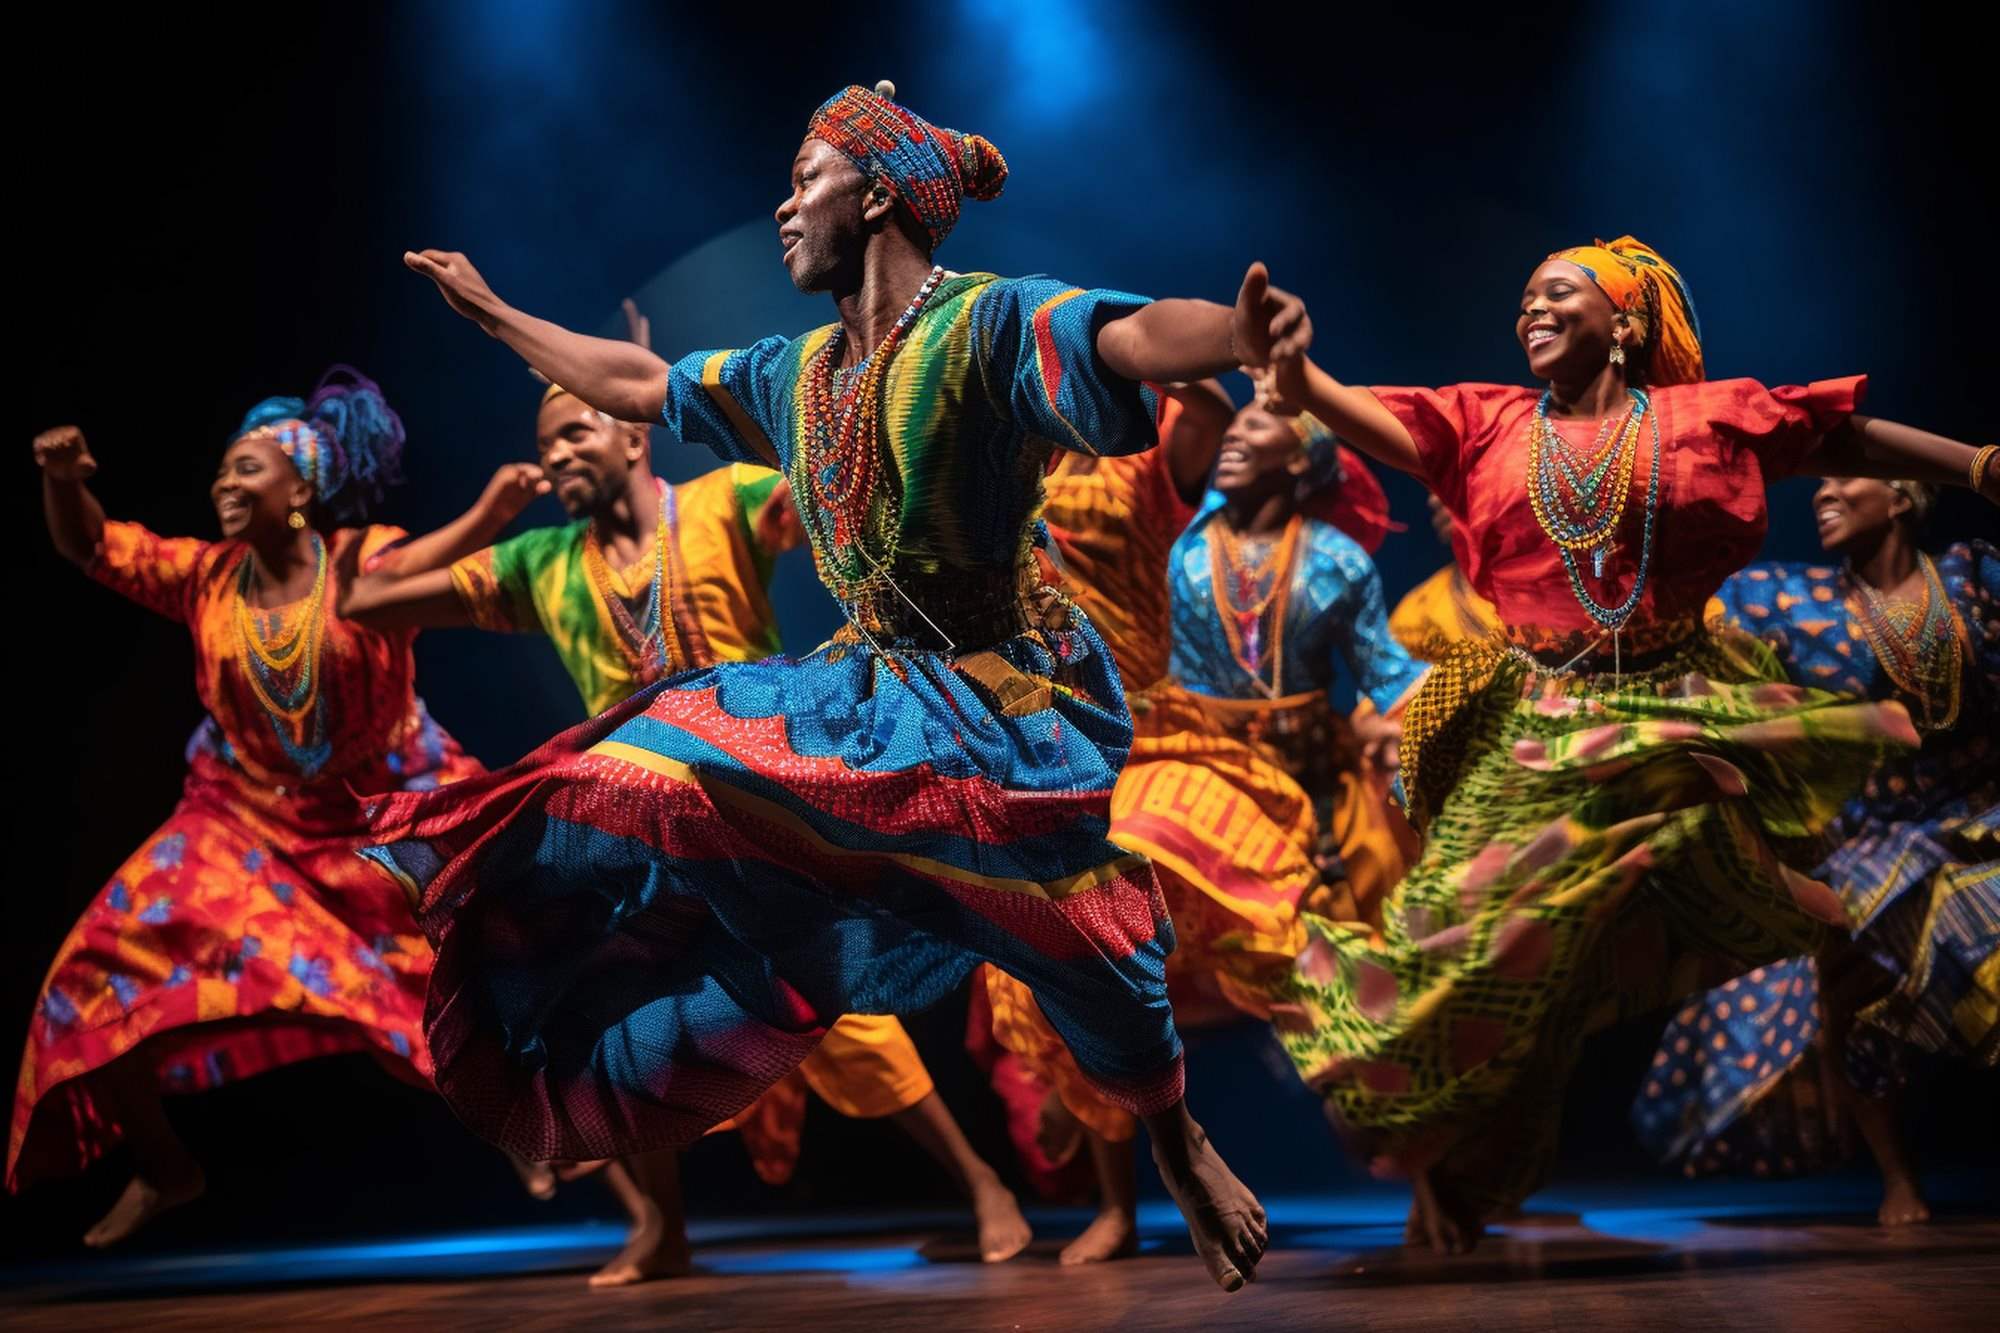 African dancers in colorful traditional African apparel.